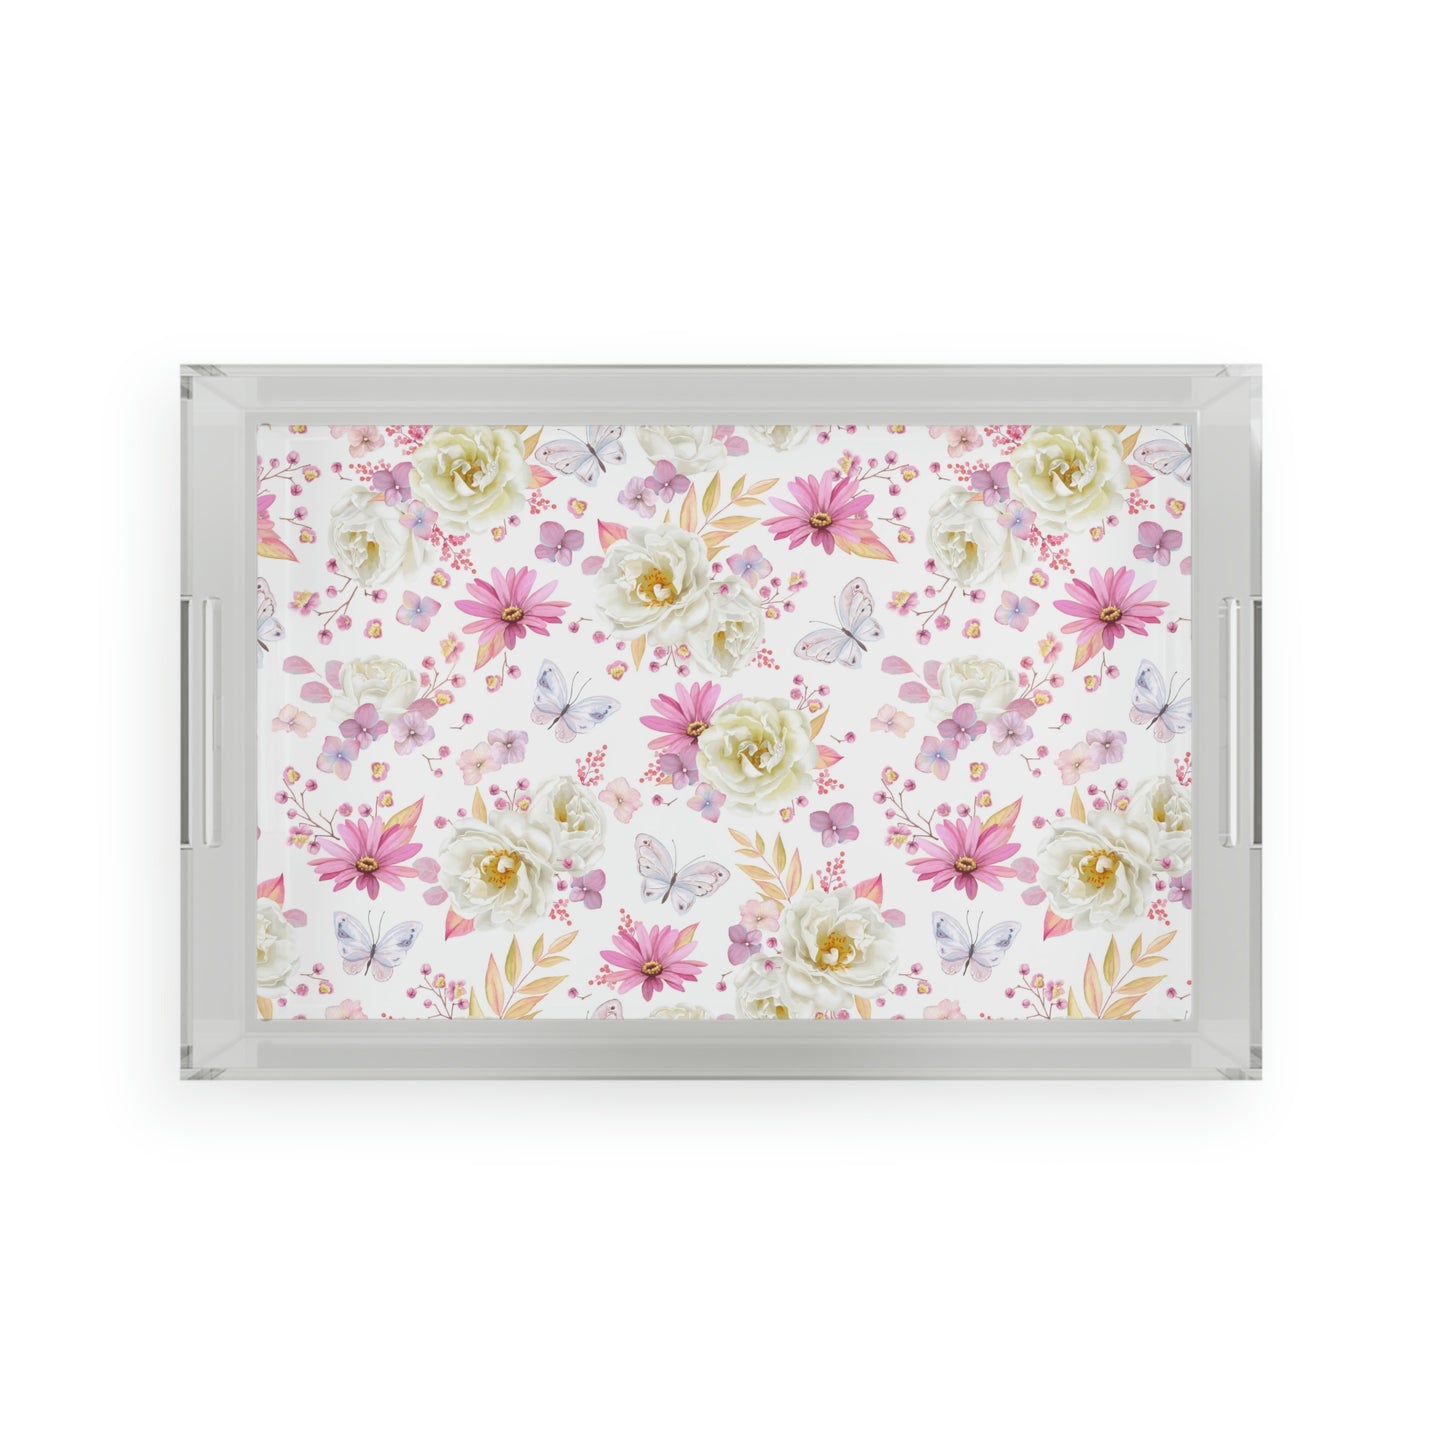 Spring Butterflies and Roses Acrylic Serving Tray